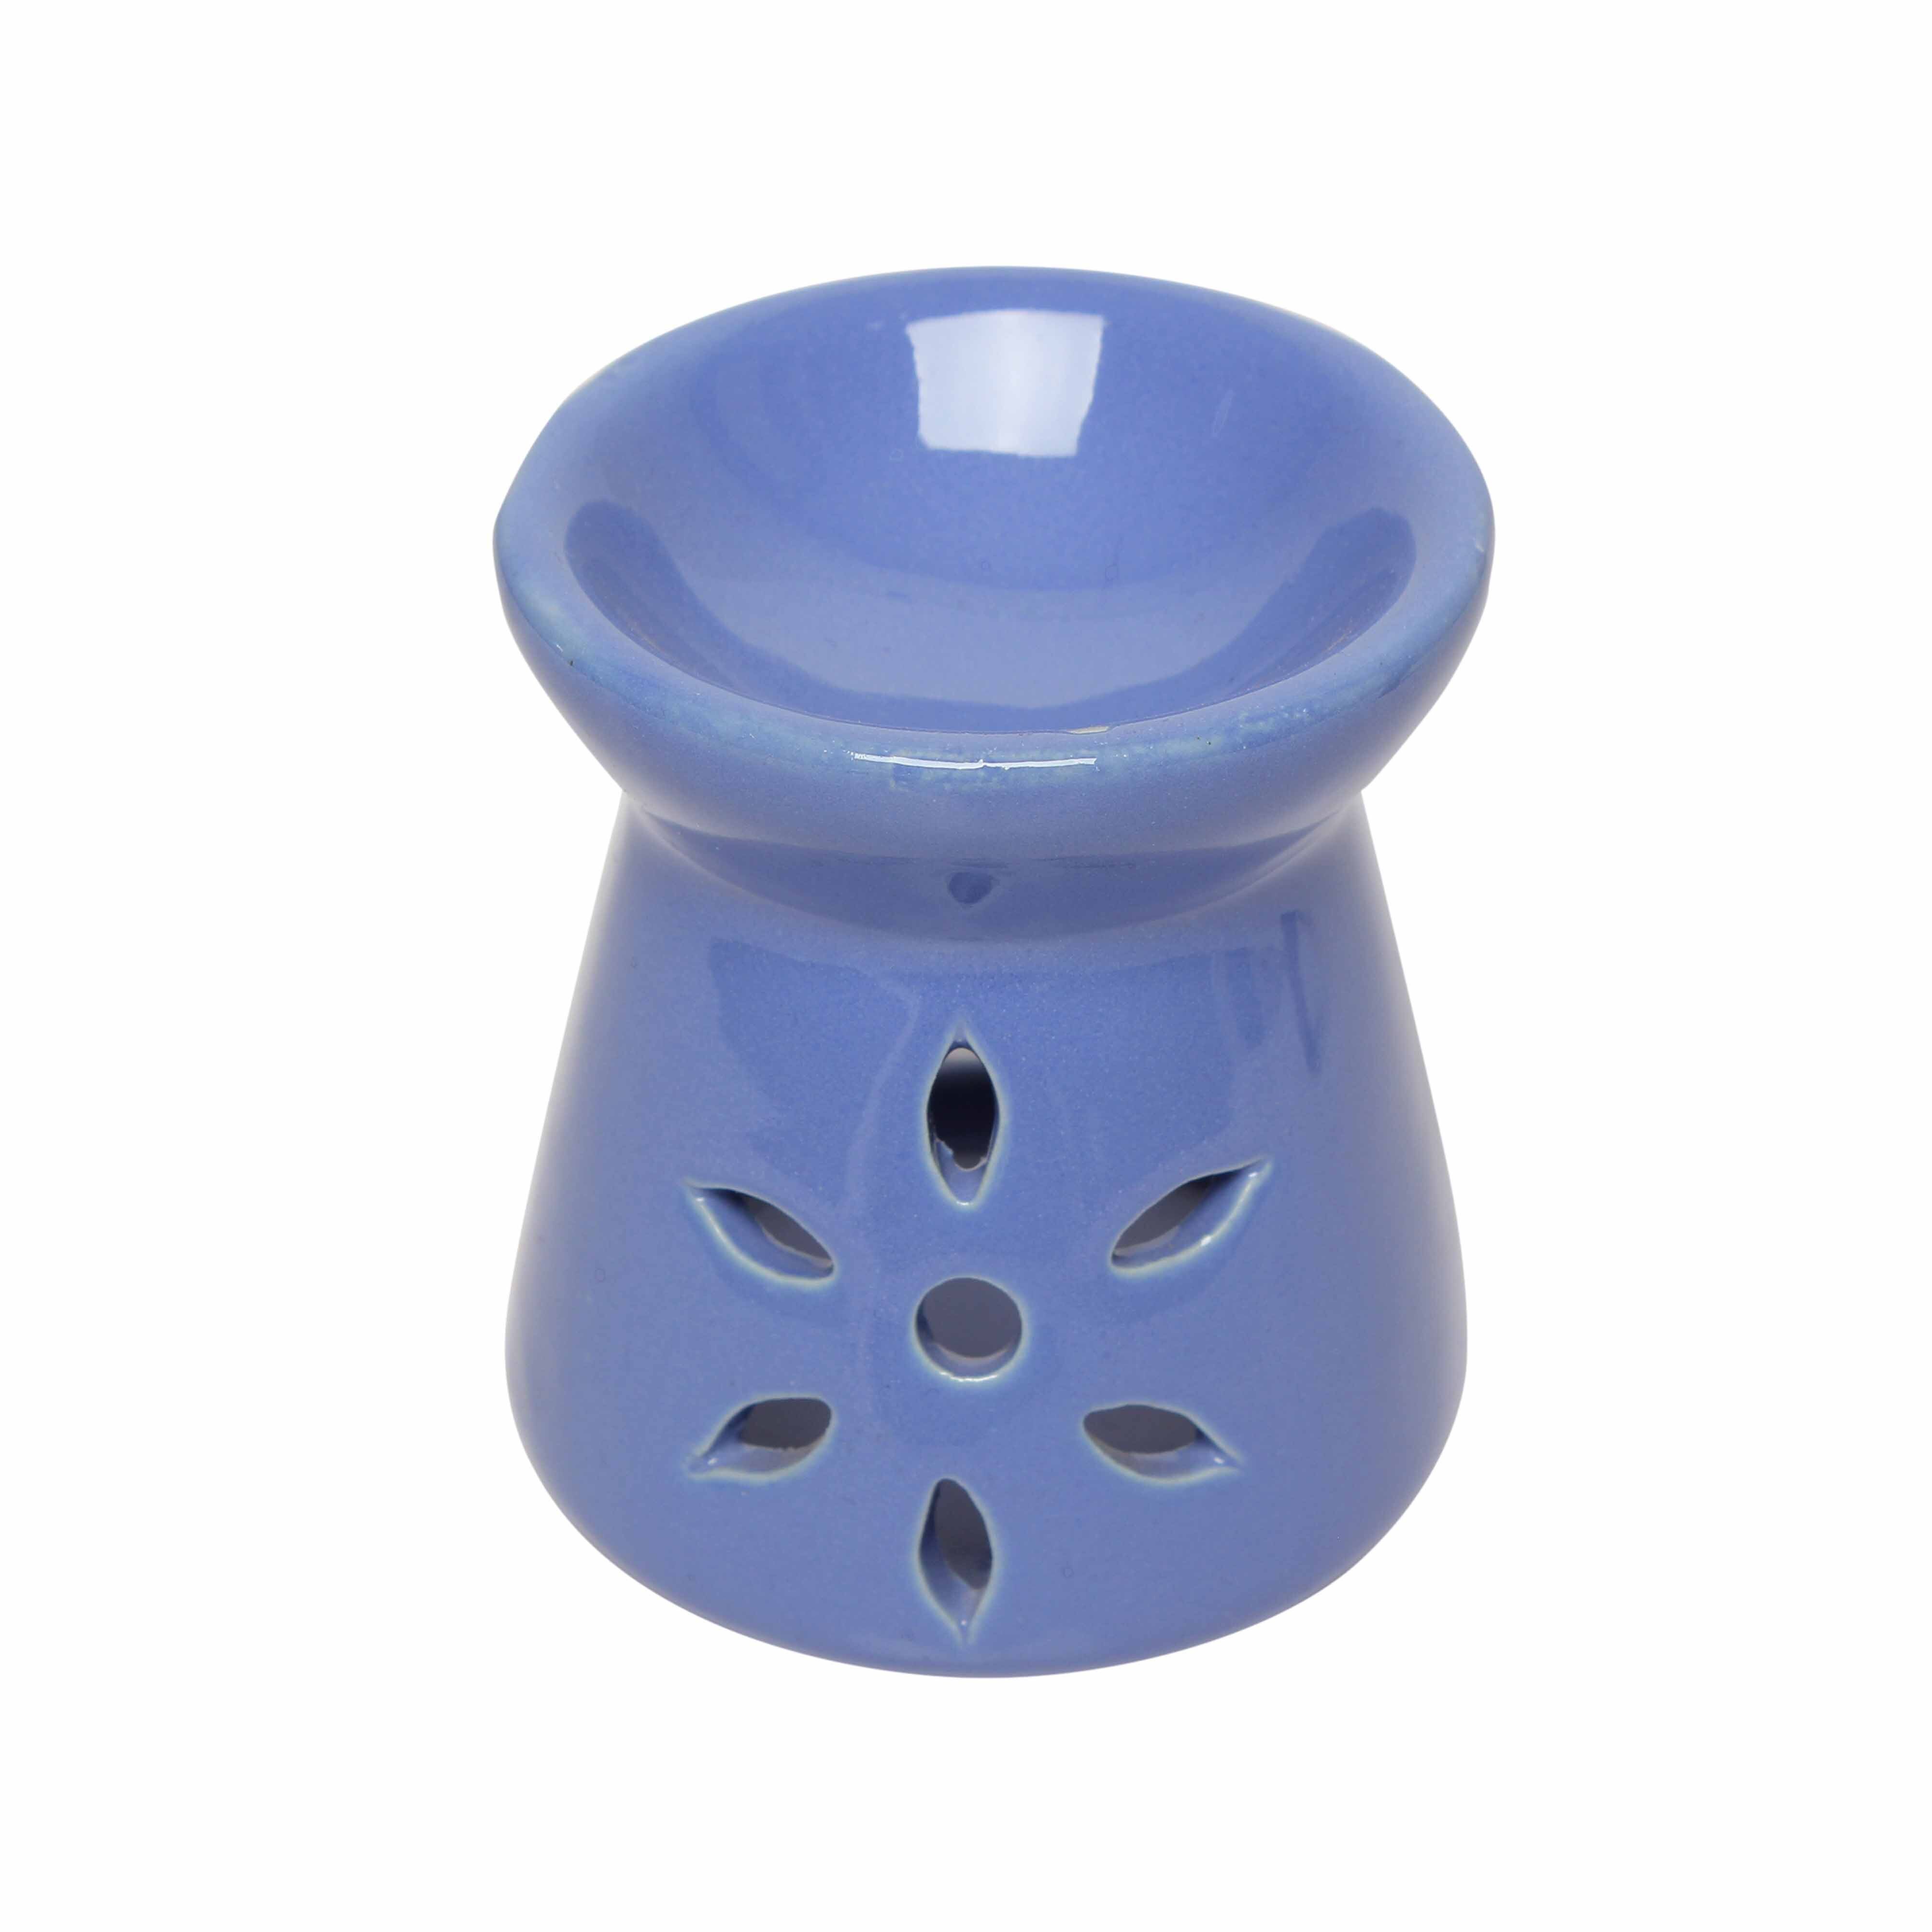 Asian Aura Ceramic Aromatic Oil Diffuser with 2 oil bottles AA-CB-0043Pur